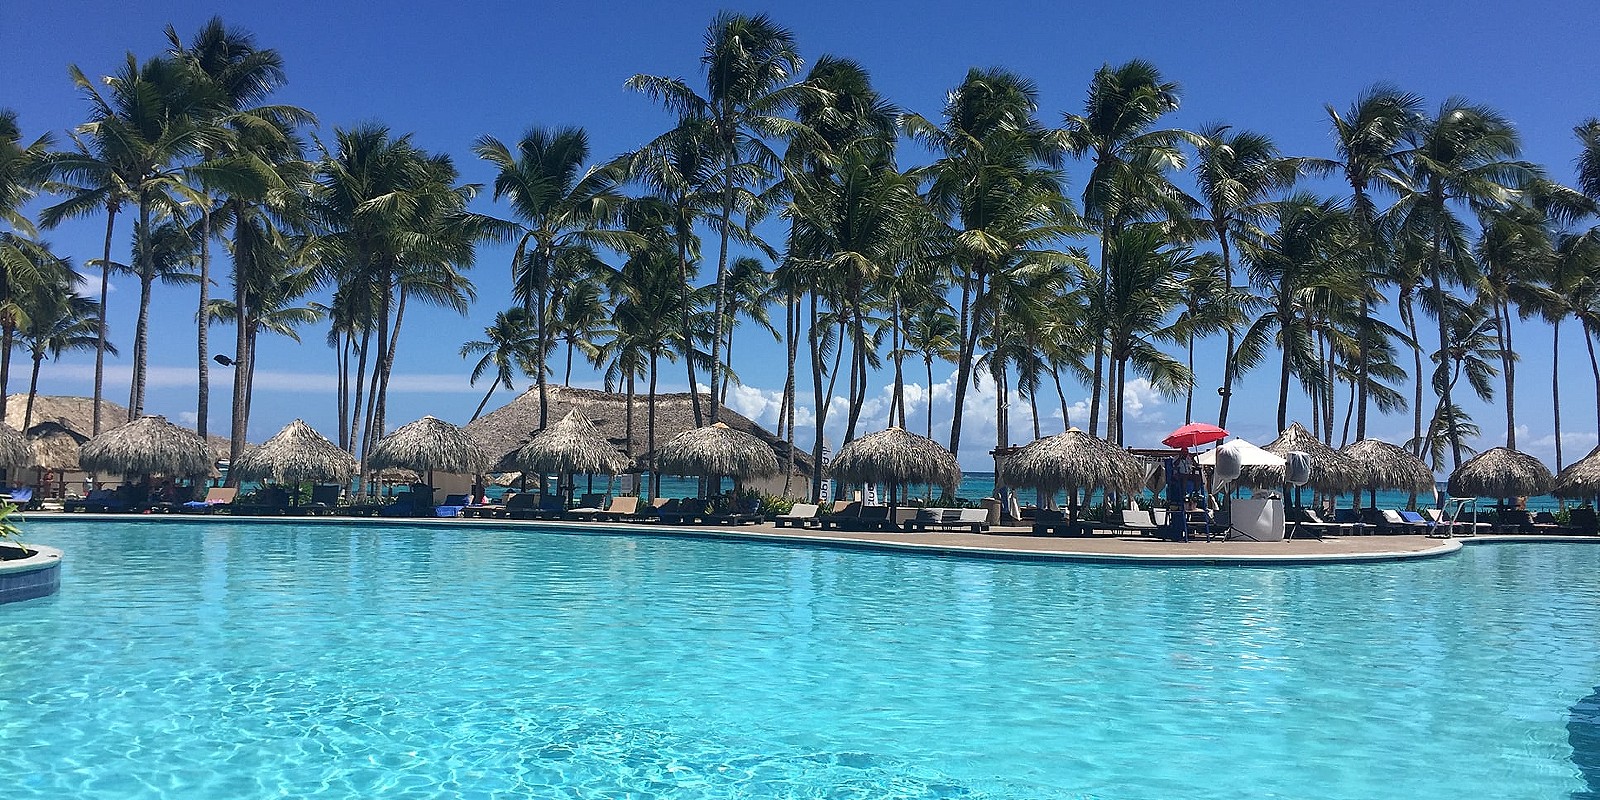 Travel blog: 3 Punta Cana Resorts We’re Completely Obsessed With (Updated January 2022)